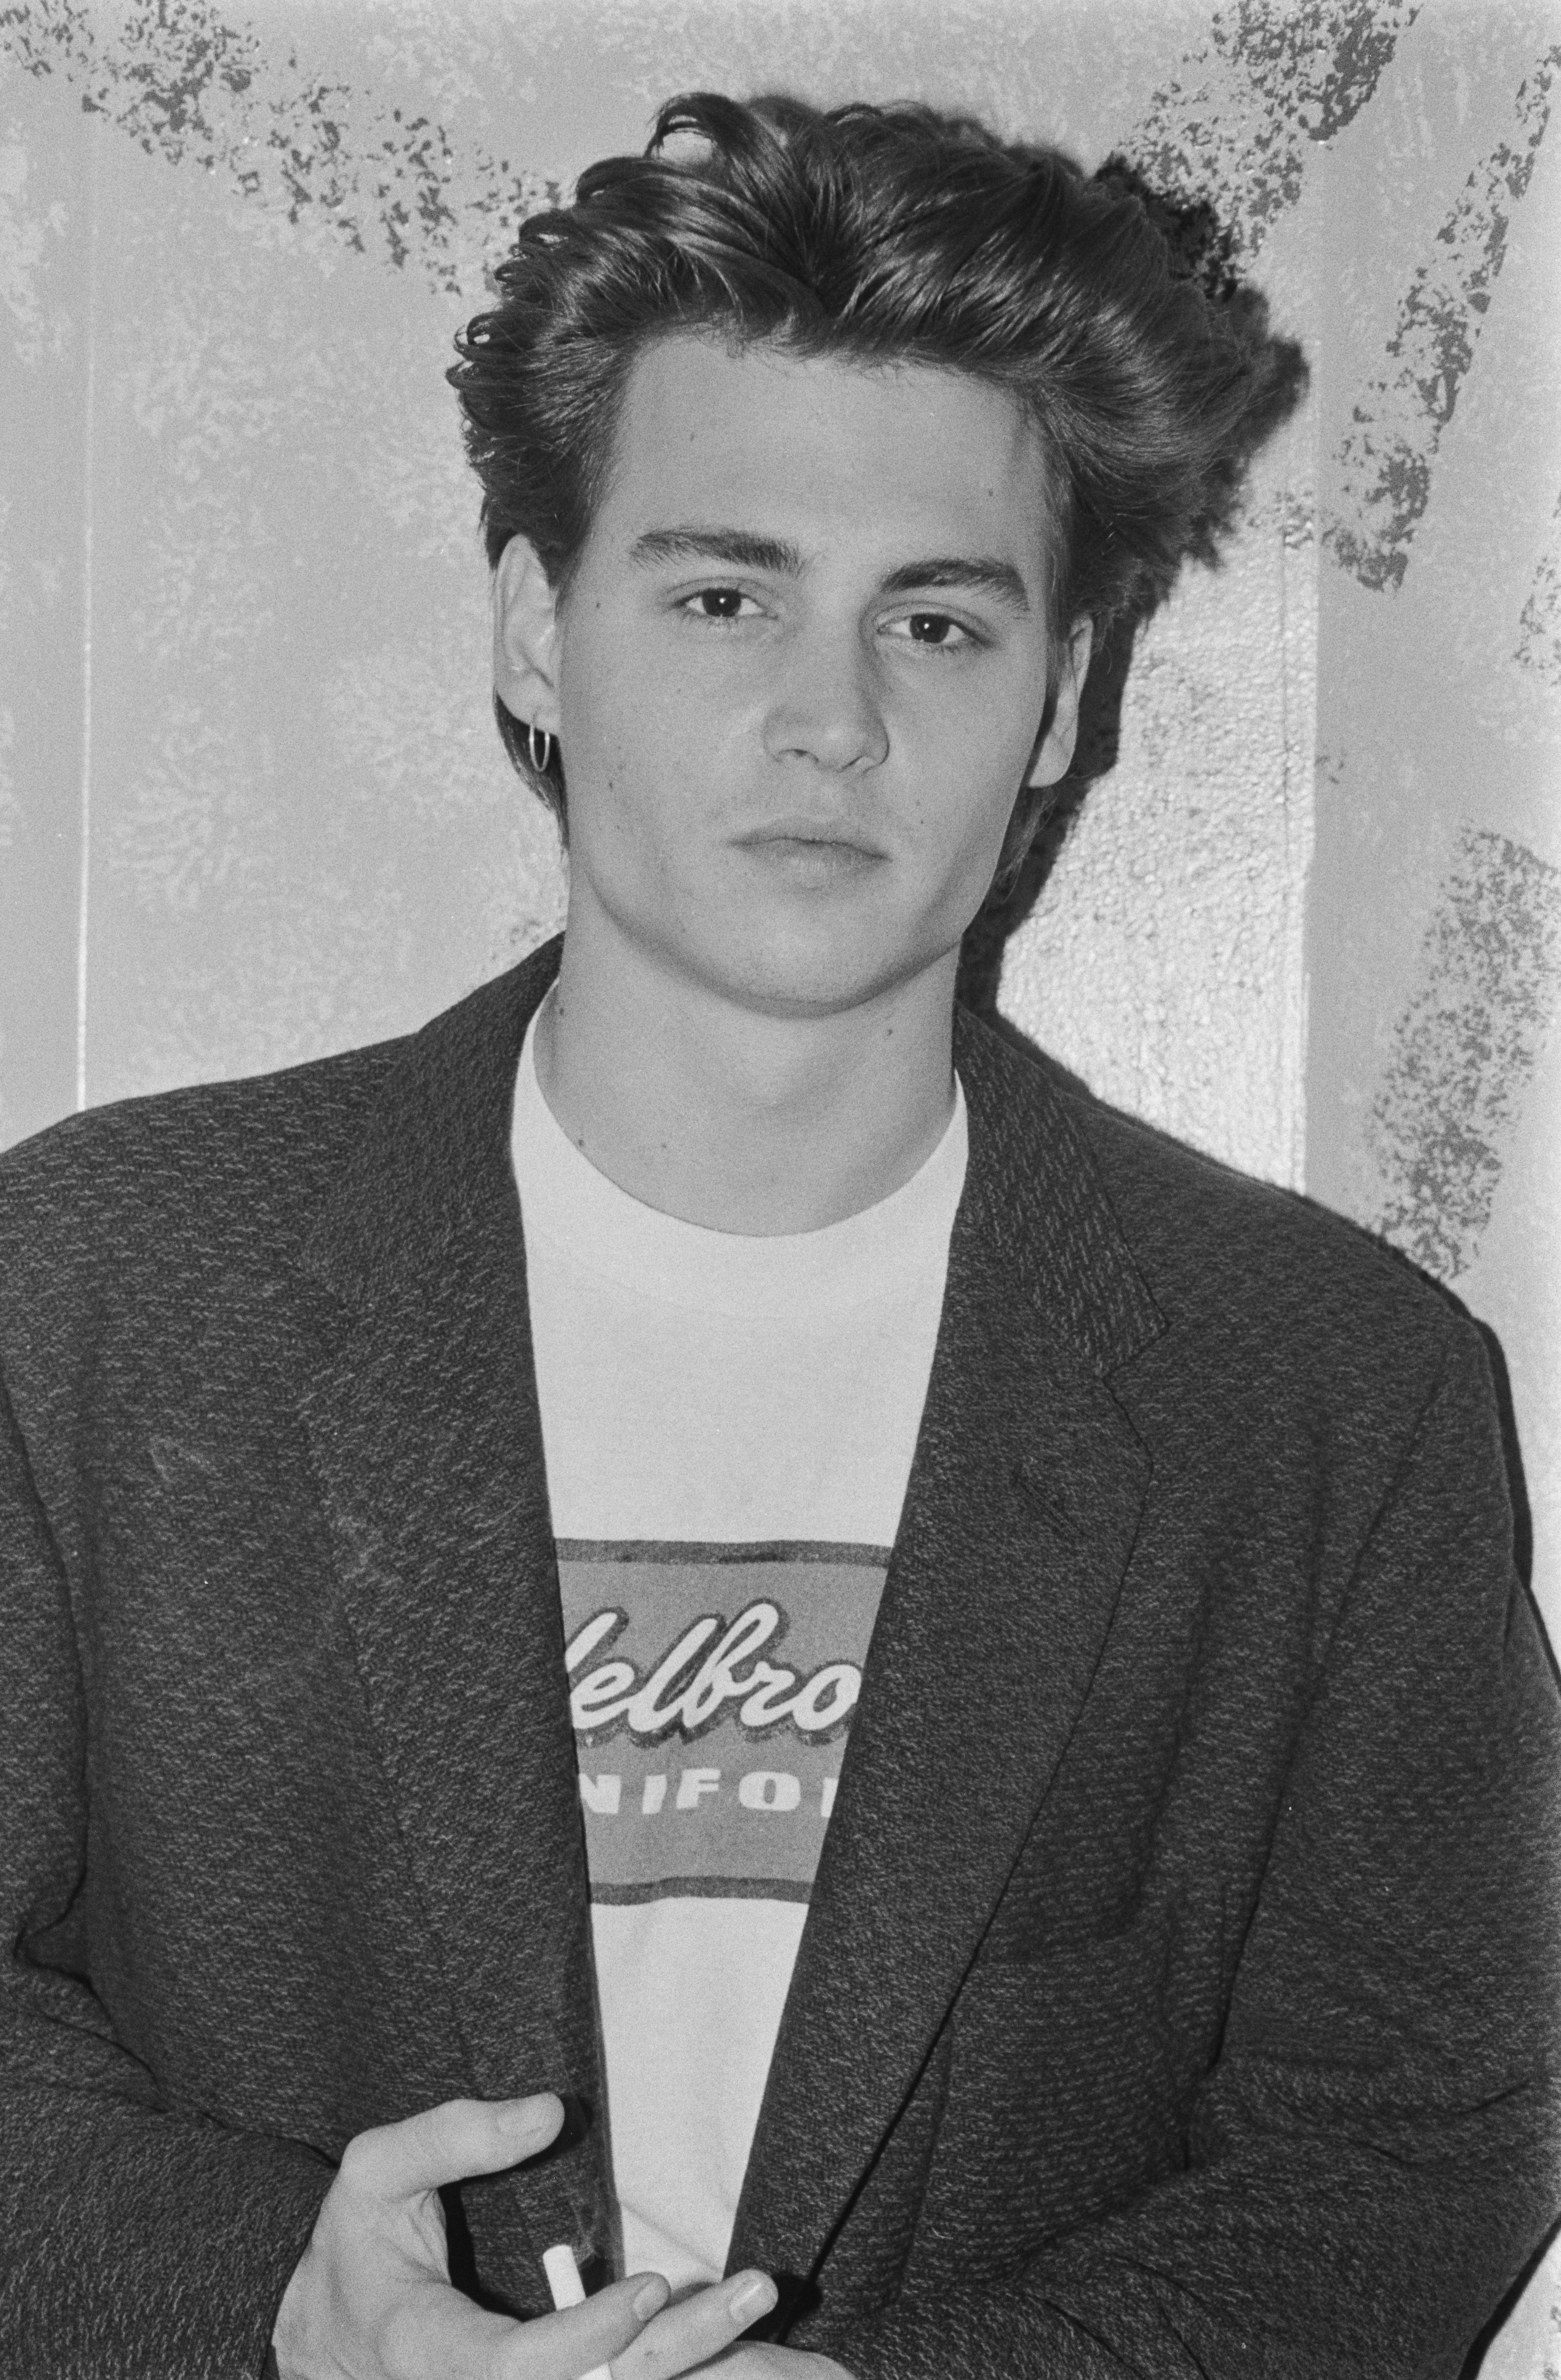 Johnny Depp in a black and white image at the Limelight in New York City, circa 1988. | Source: Michael Ochs Archives/Getty Images